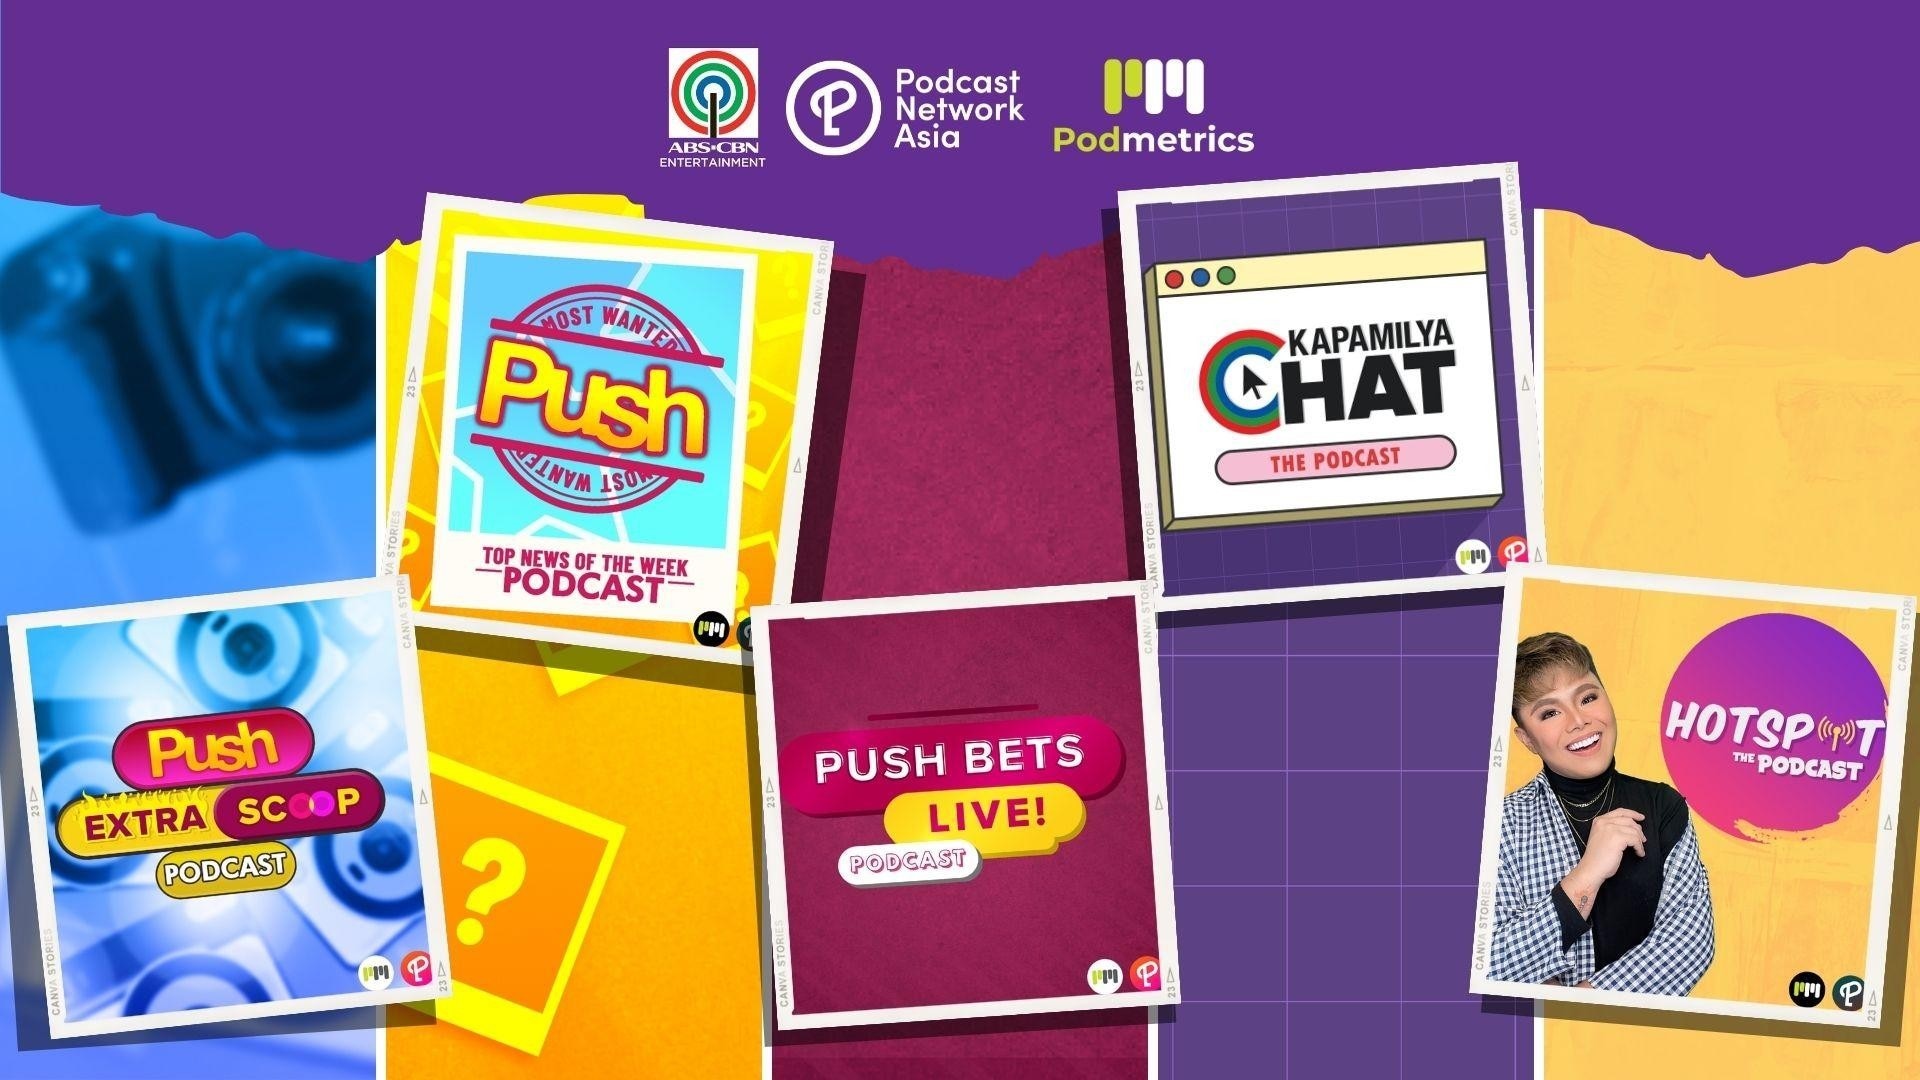 ABS-CBN Entertainment and Podcast Network Asia launch 5 new podcasts